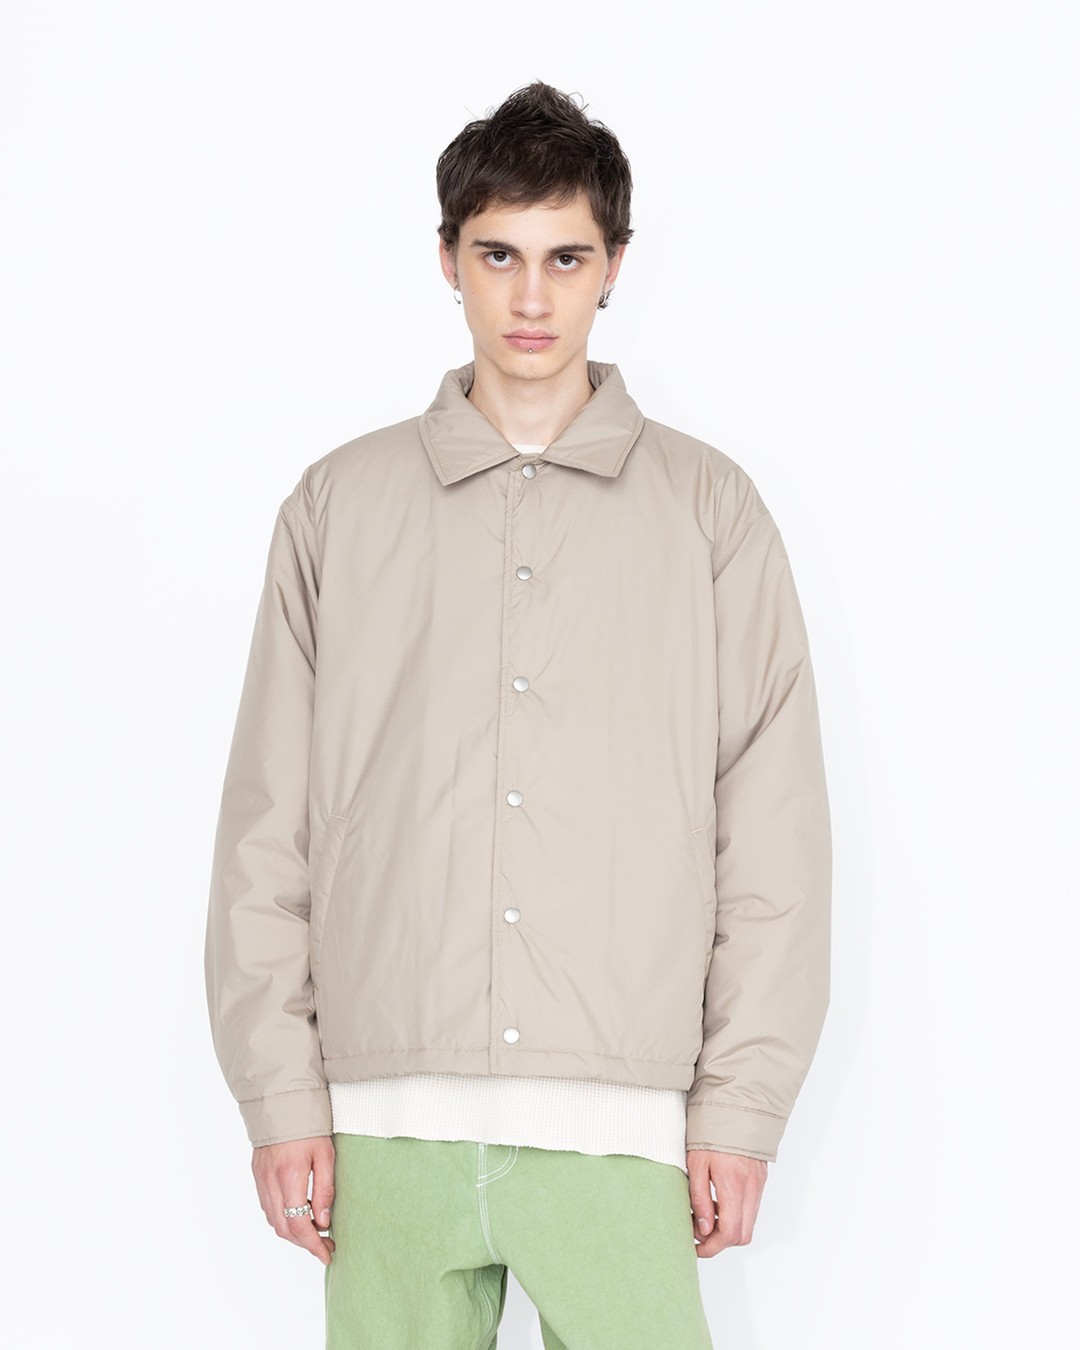 Highsnobiety HS05 – Light Insulated Eco-Poly Jacket Beige - Outerwear - Beige - Image 3